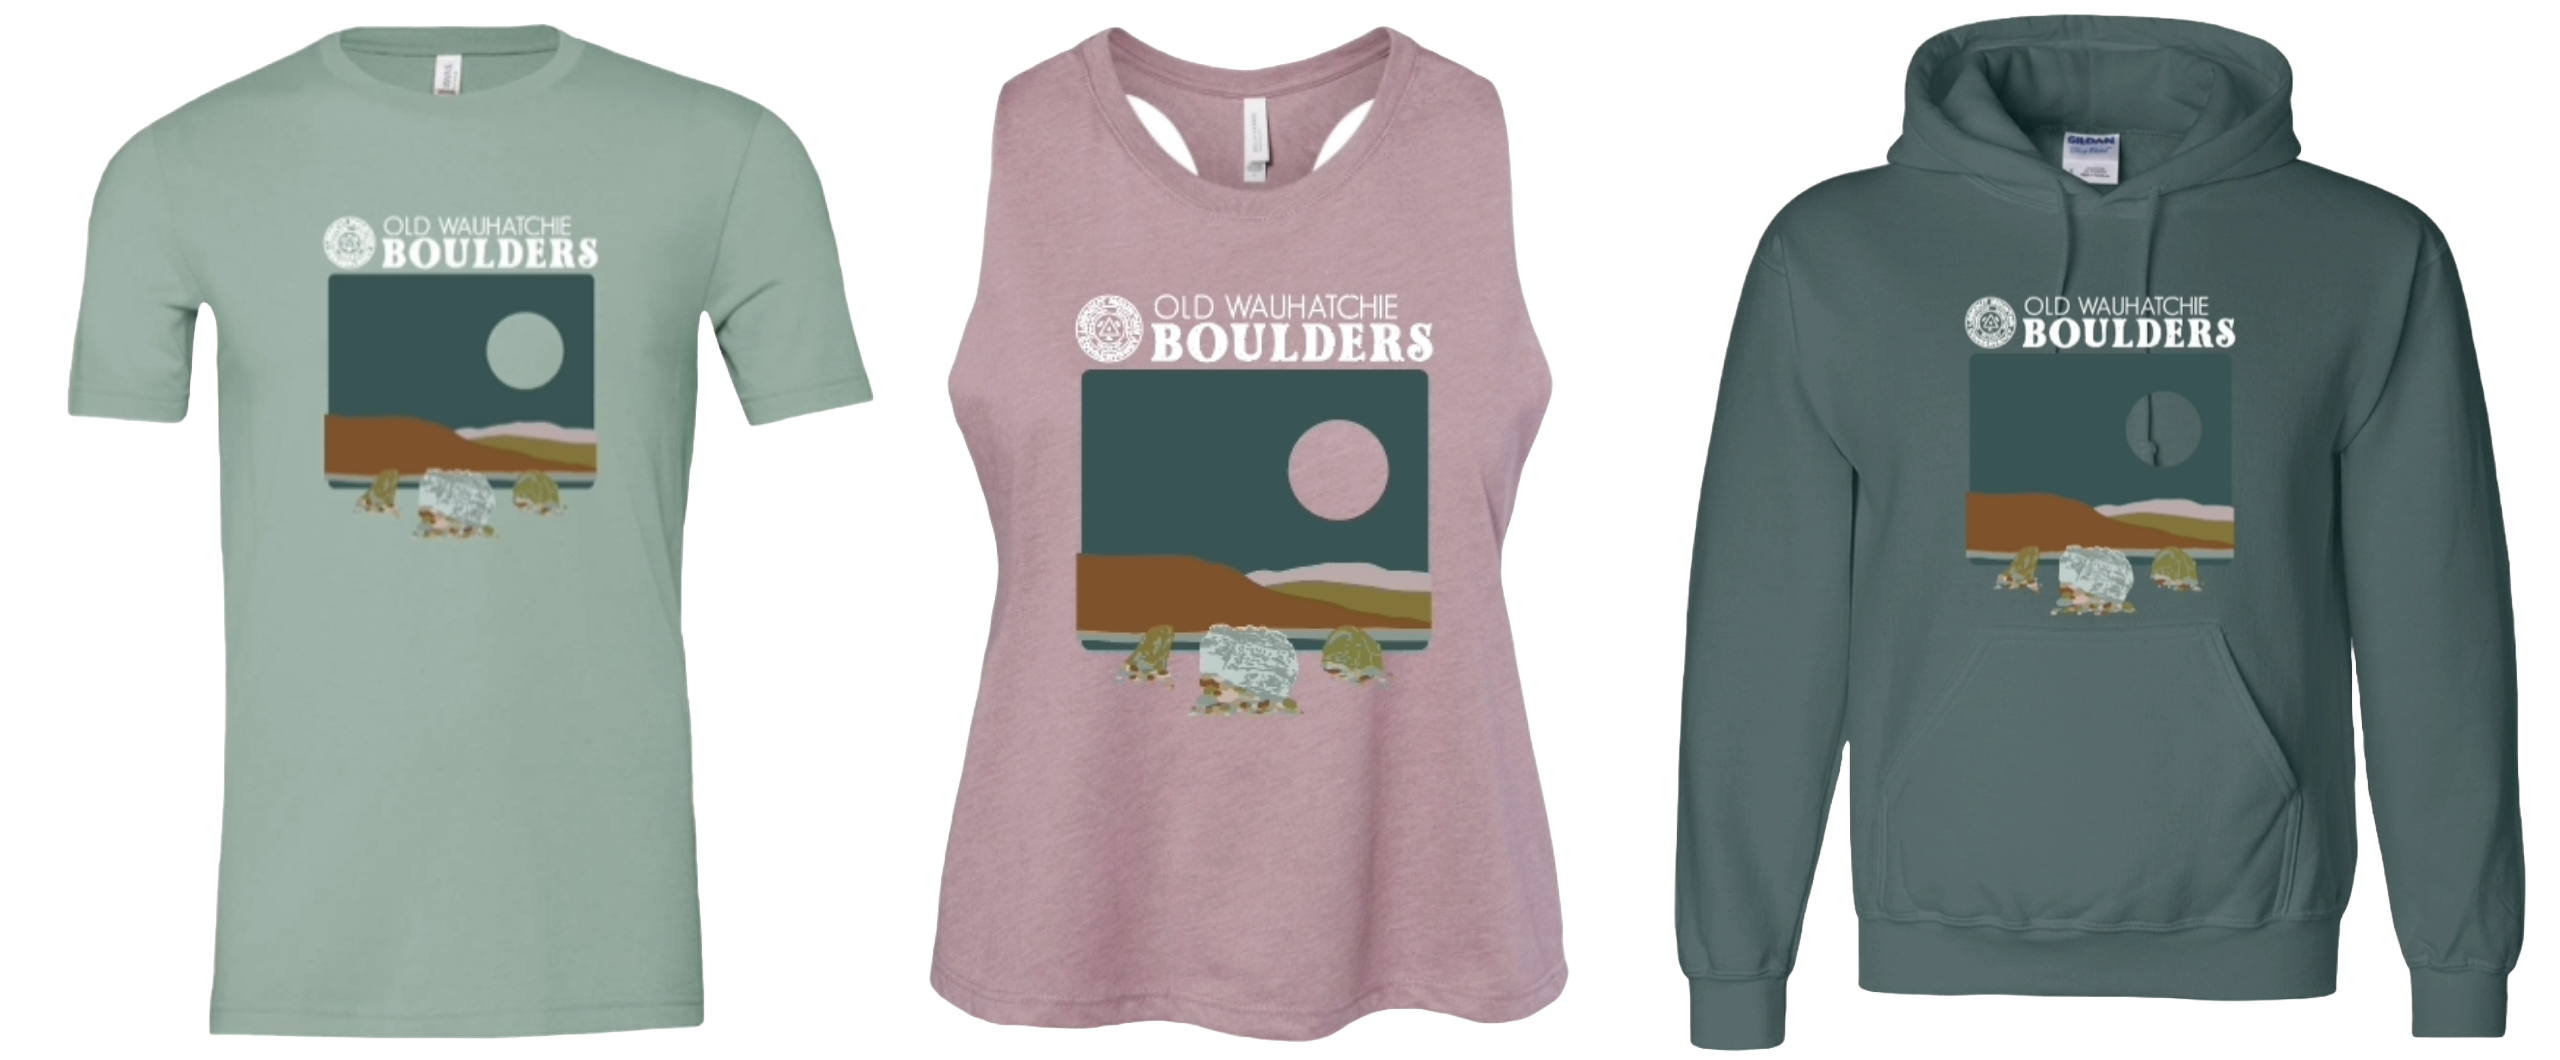 Pictured: new sage green Boulderfest t-shirt, dusty rose racer back tank, and forest green sweatshirt